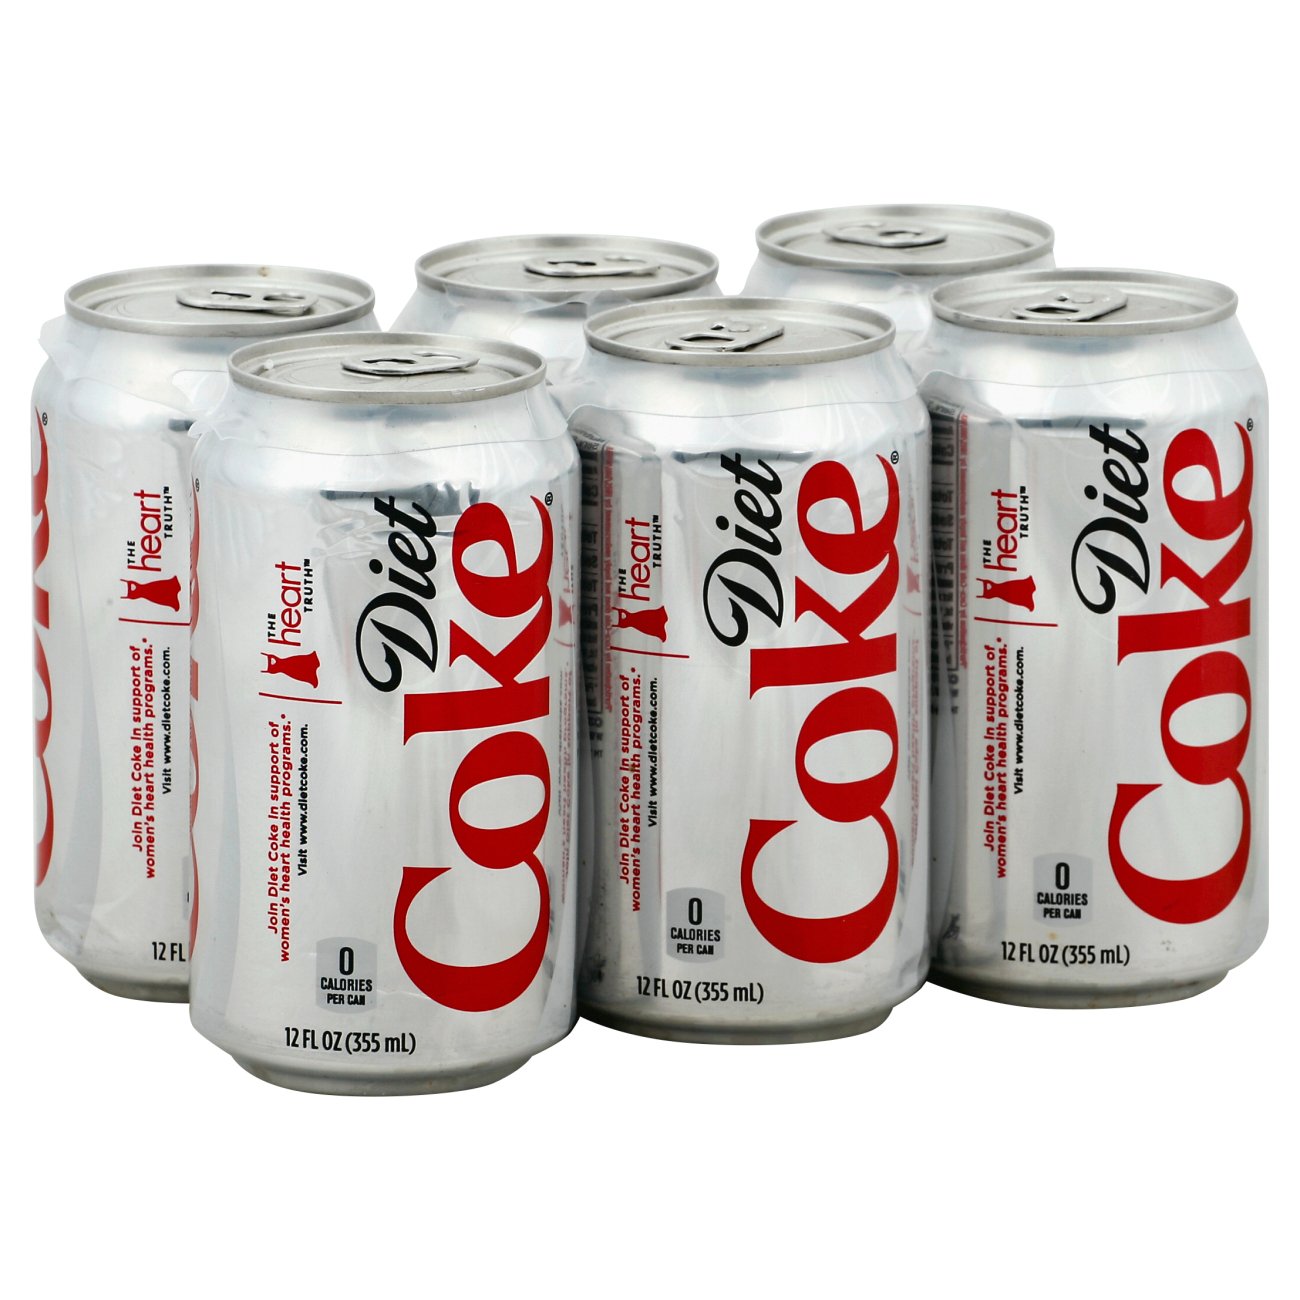 How Many Calories Are In Diet Coke